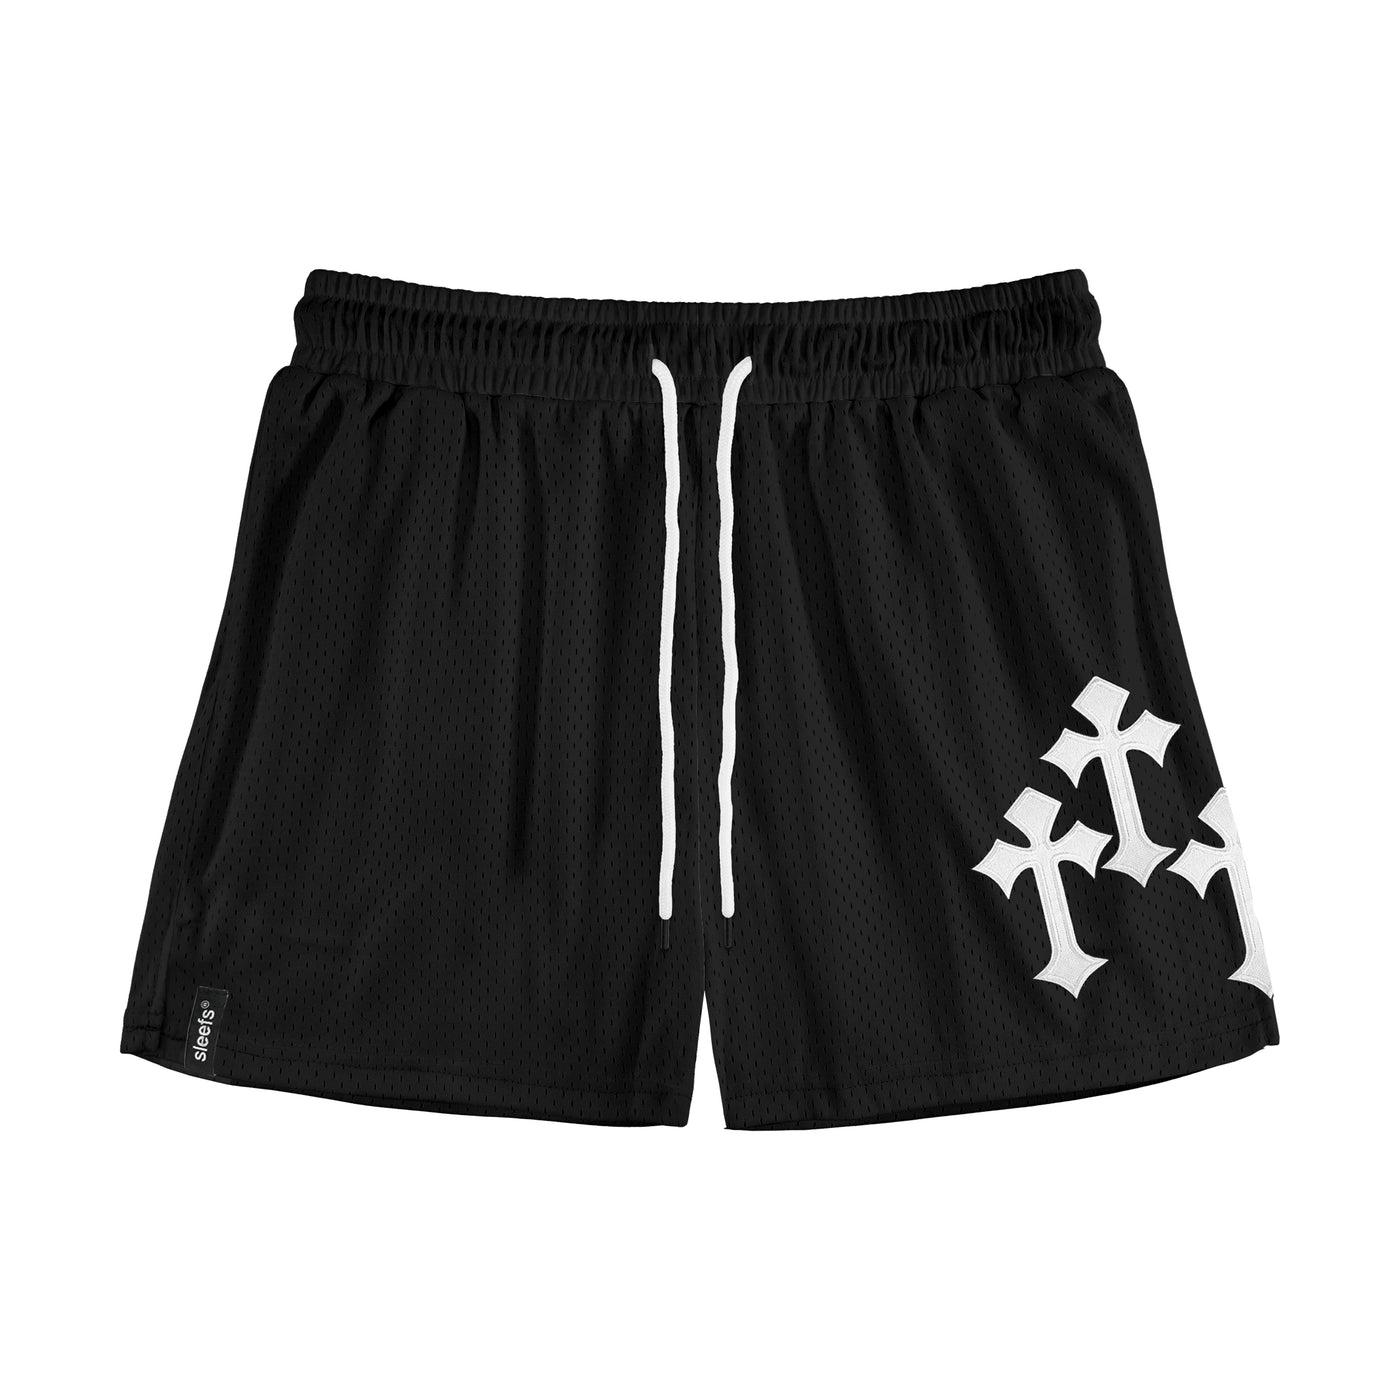 Gothic Cross Patches Black Shorts - 5"